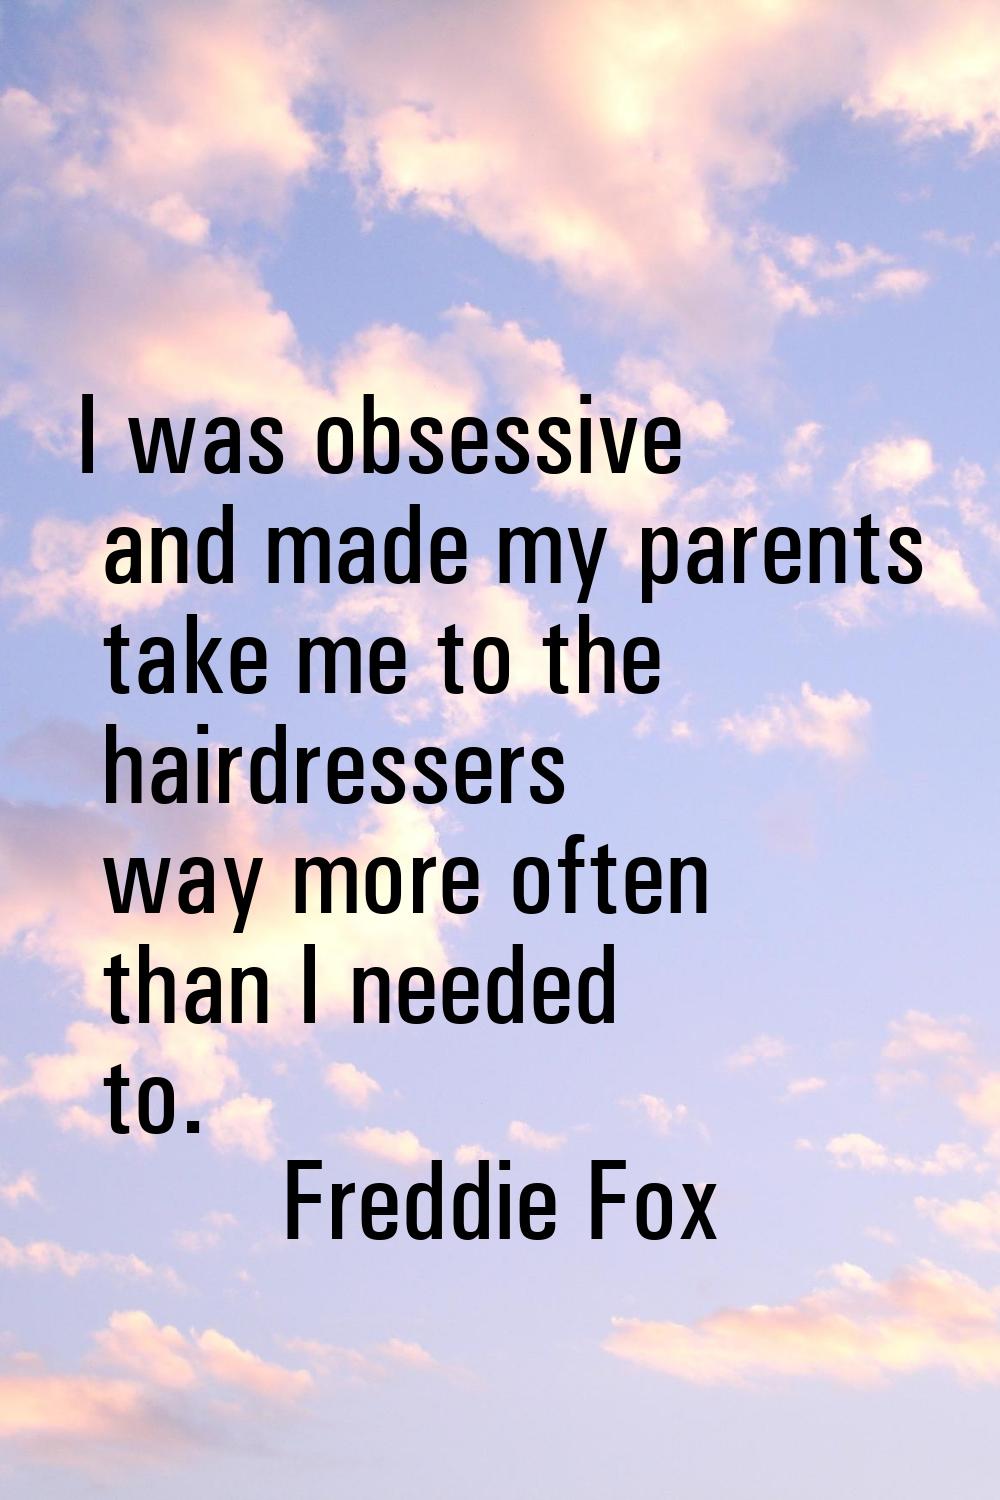 I was obsessive and made my parents take me to the hairdressers way more often than I needed to.